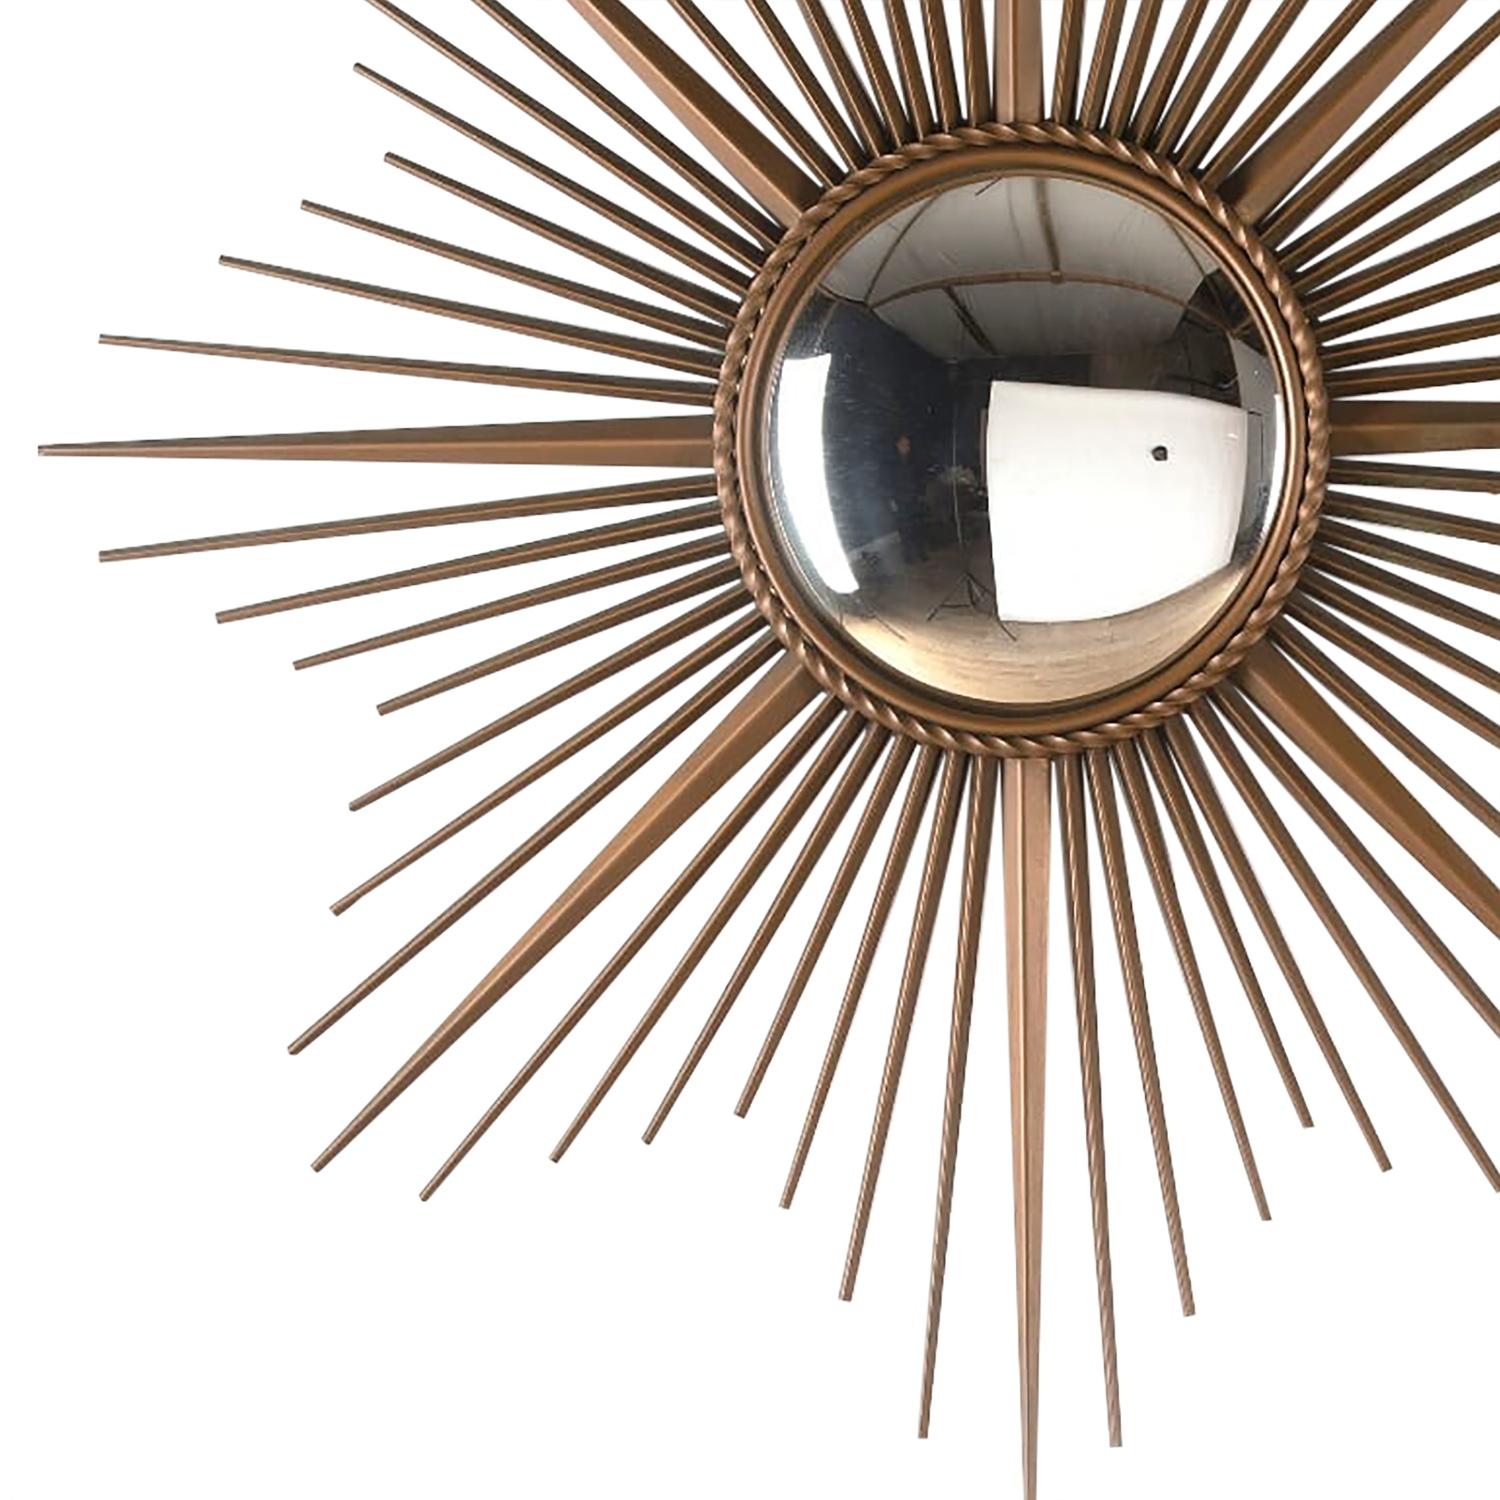 A metal convex mirror manufactured by the French company Chatty Valarus. There is a second mirror available of the same size and dimensions that would make a pair of mirrors if required.